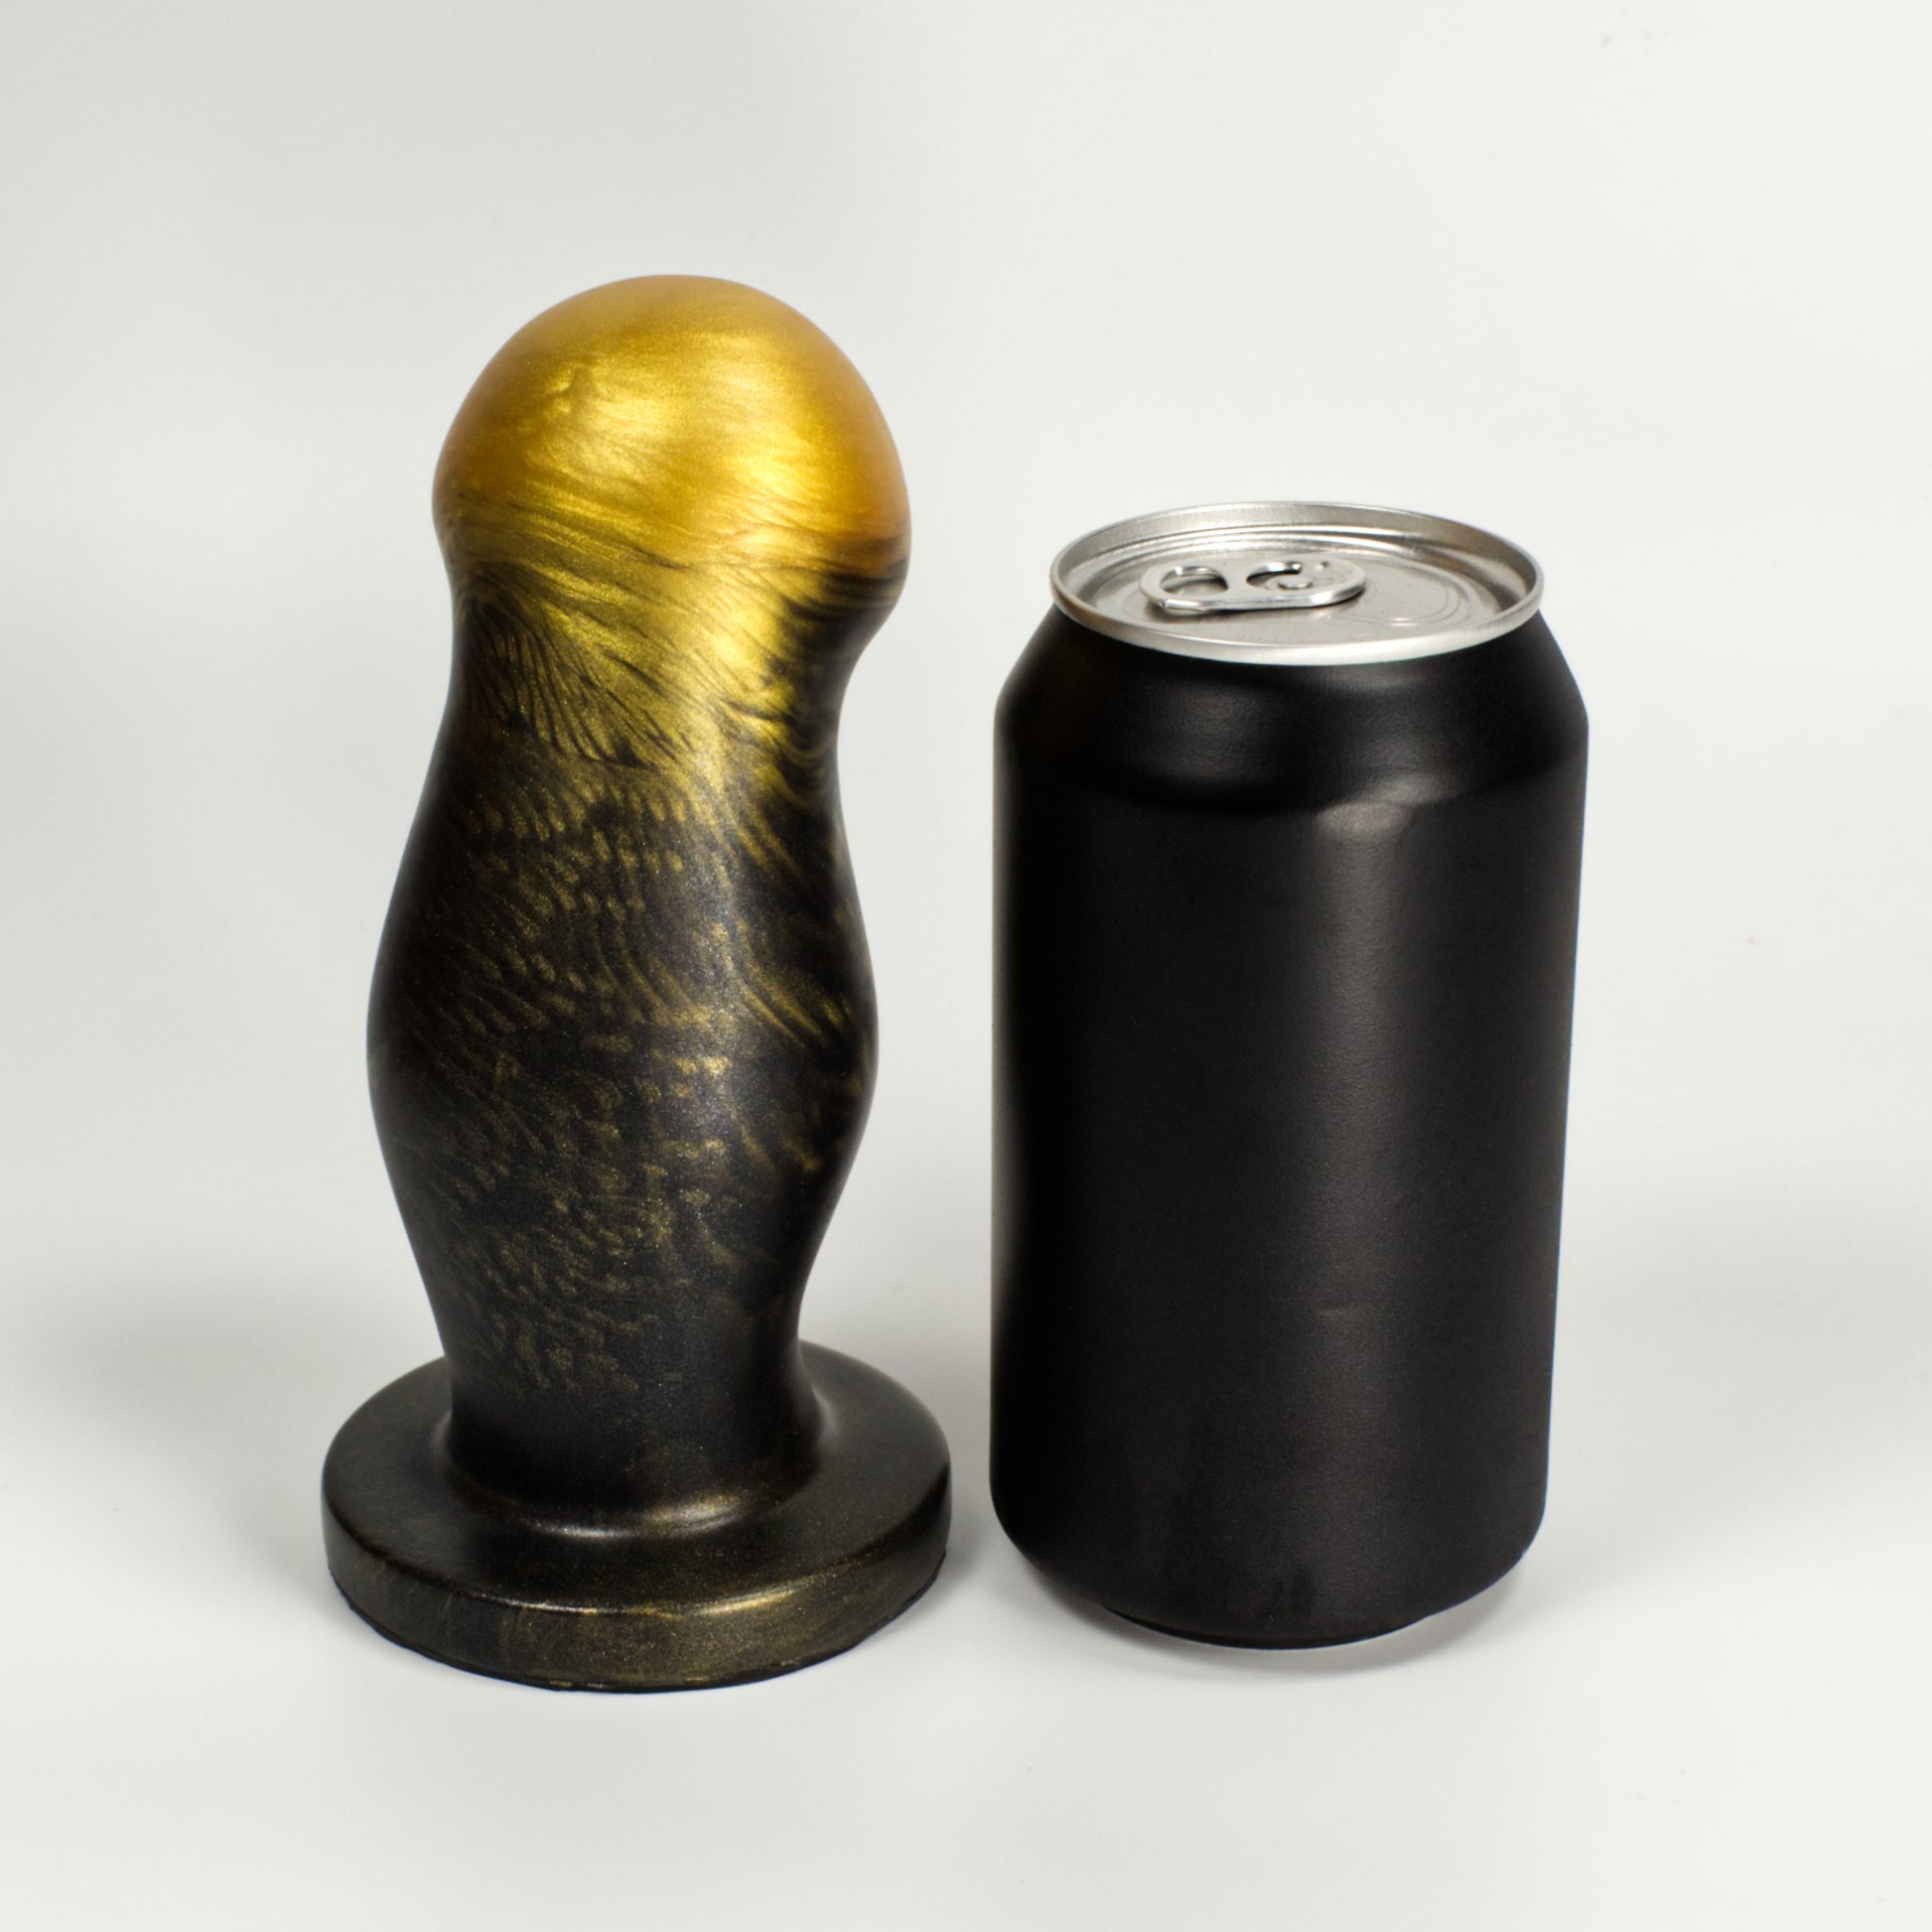 Back view of the Ally L next to a standard soda can.